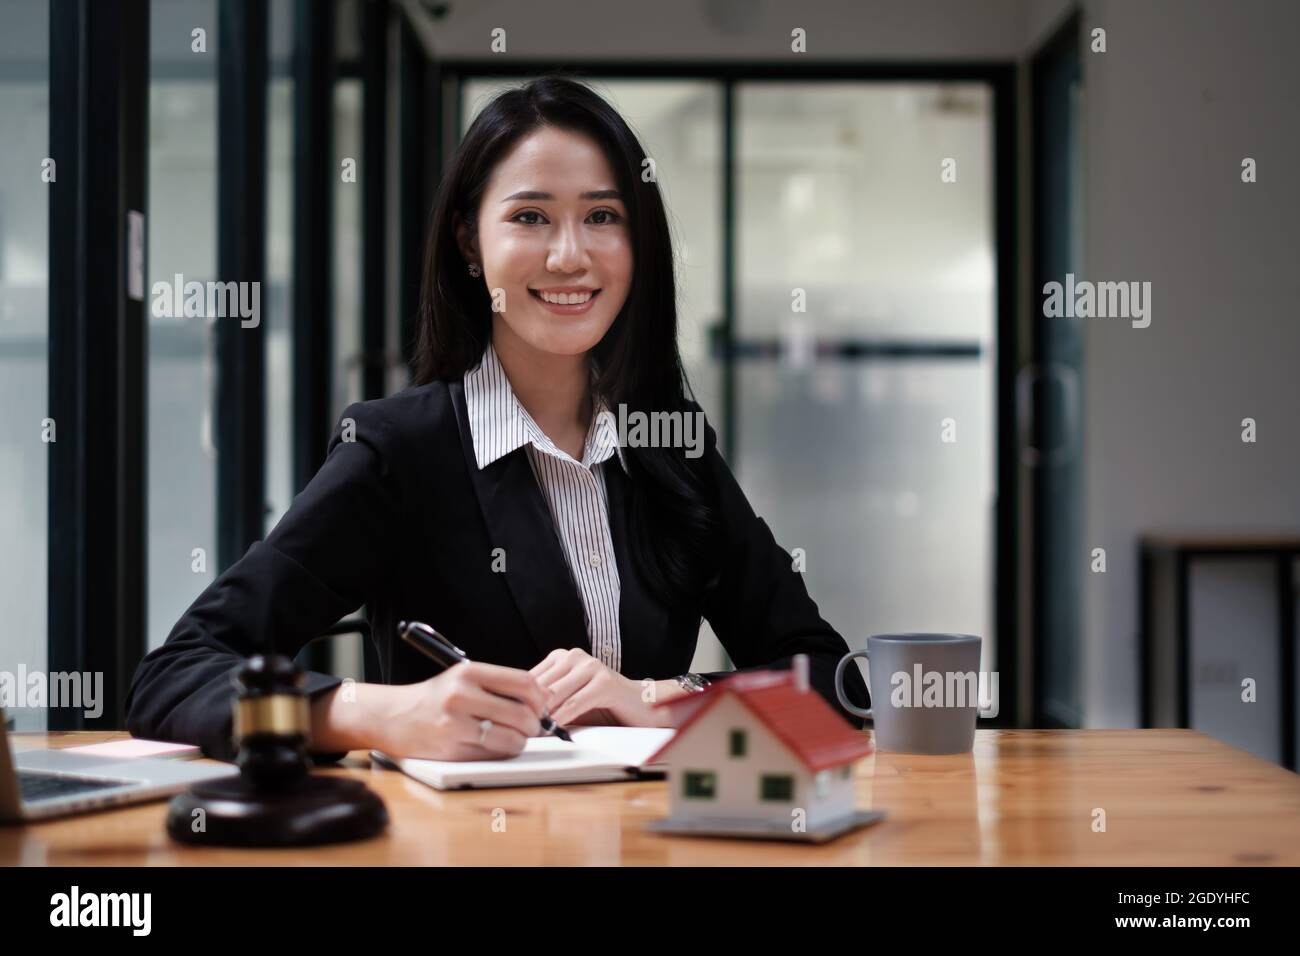 Business woman or legal advisor sitting wooden desk in office. Law, legal services, advice,Judge auction and real estate concept. Stock Photo